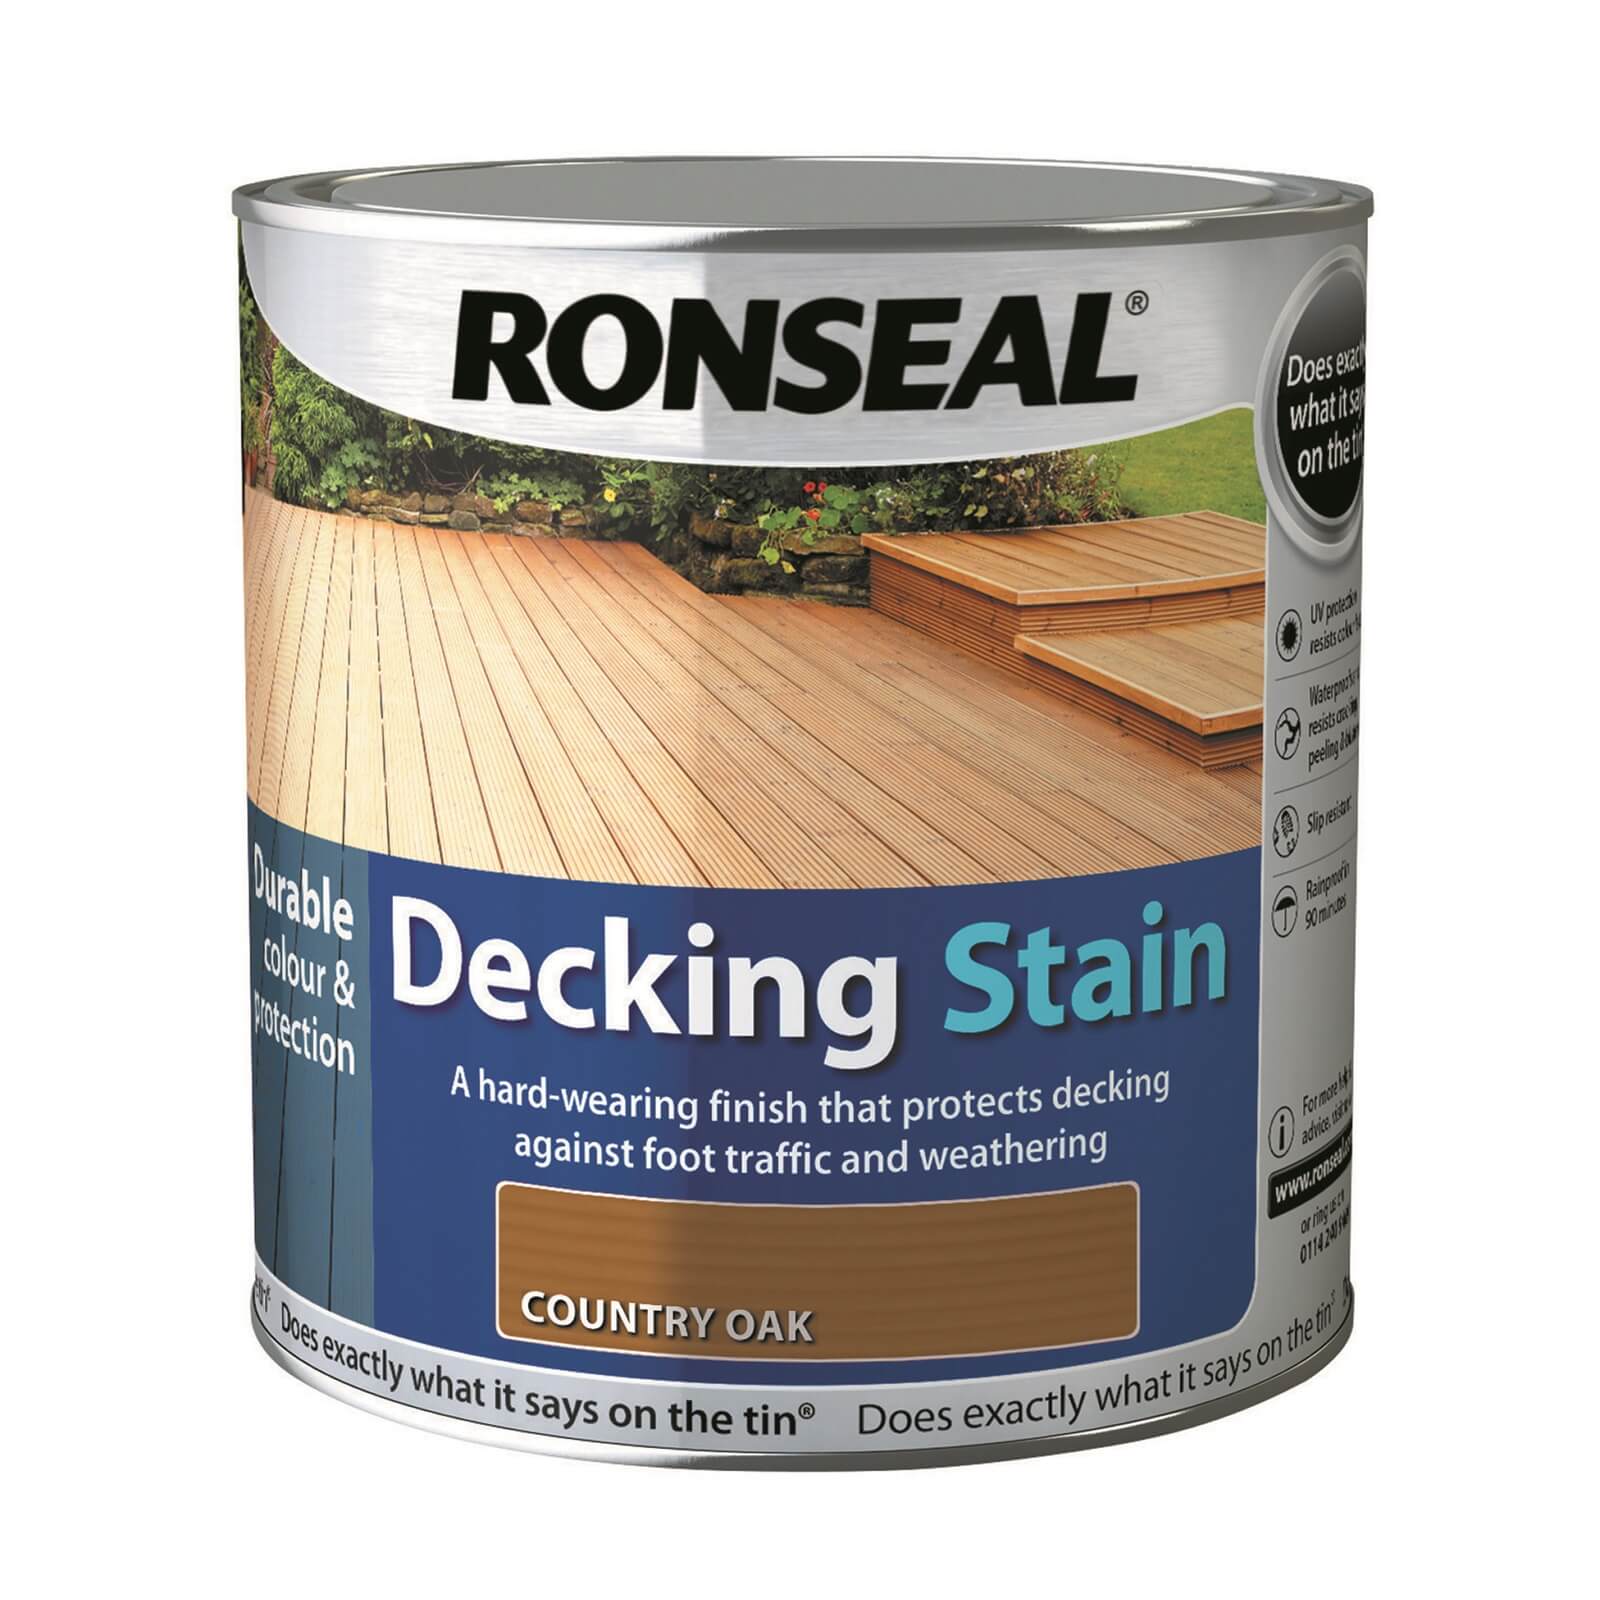 Ronseal Decking Stain Country Oak - 2.5L